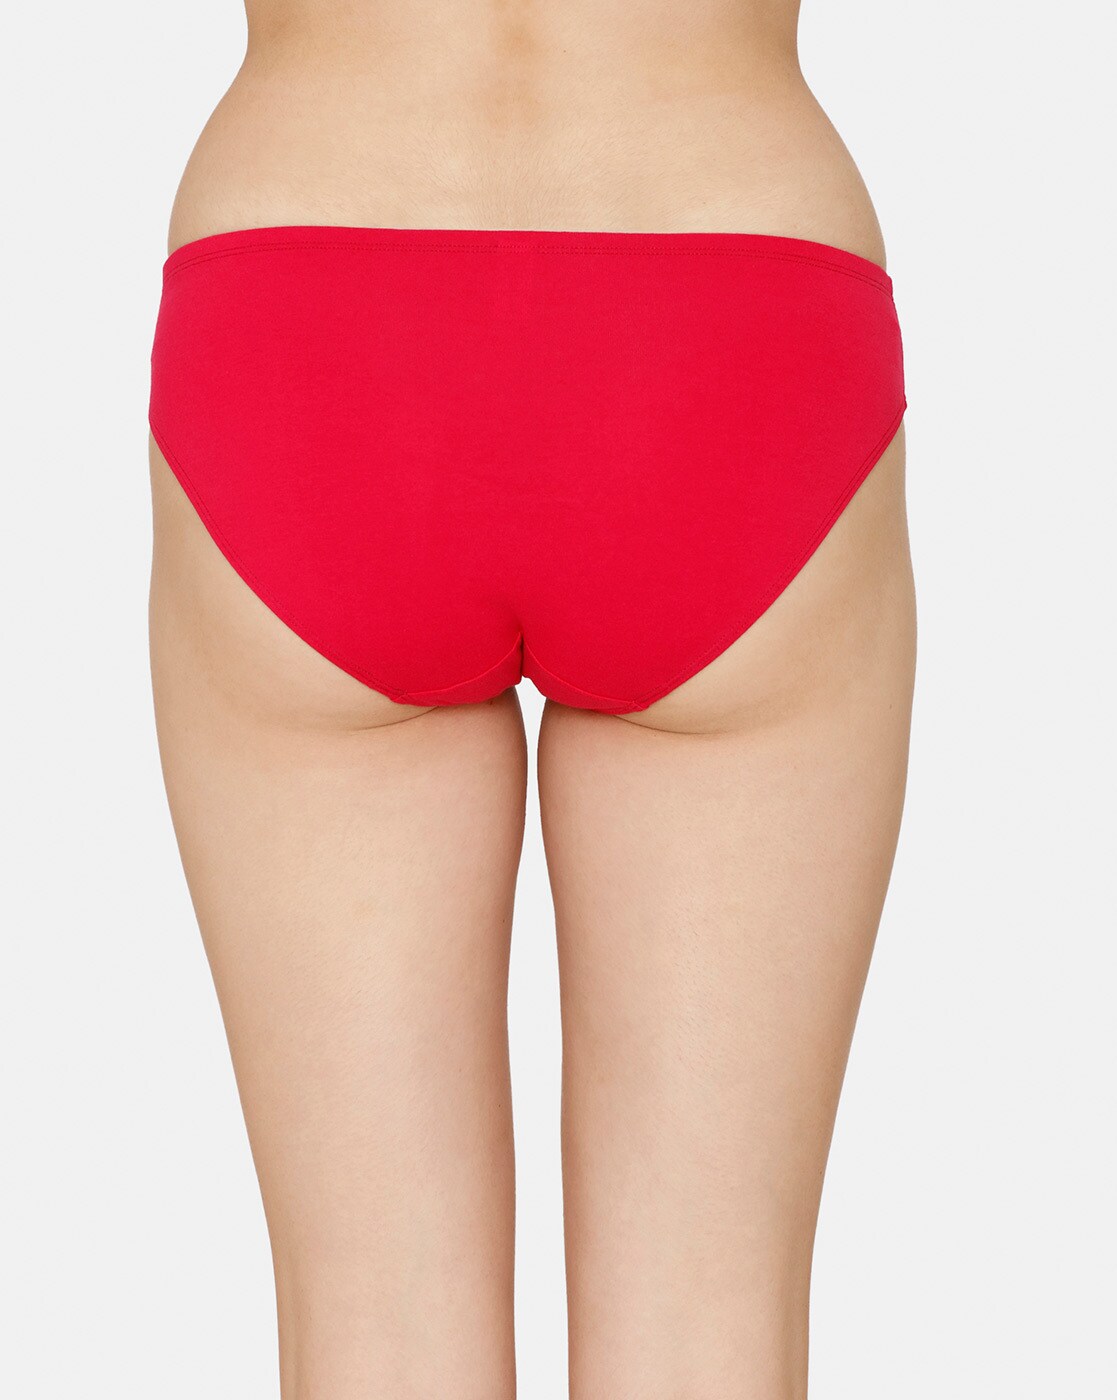 Penny by Zivame Women's Bikini (Pack of 3) XXX- LARGE at Rs.151 on